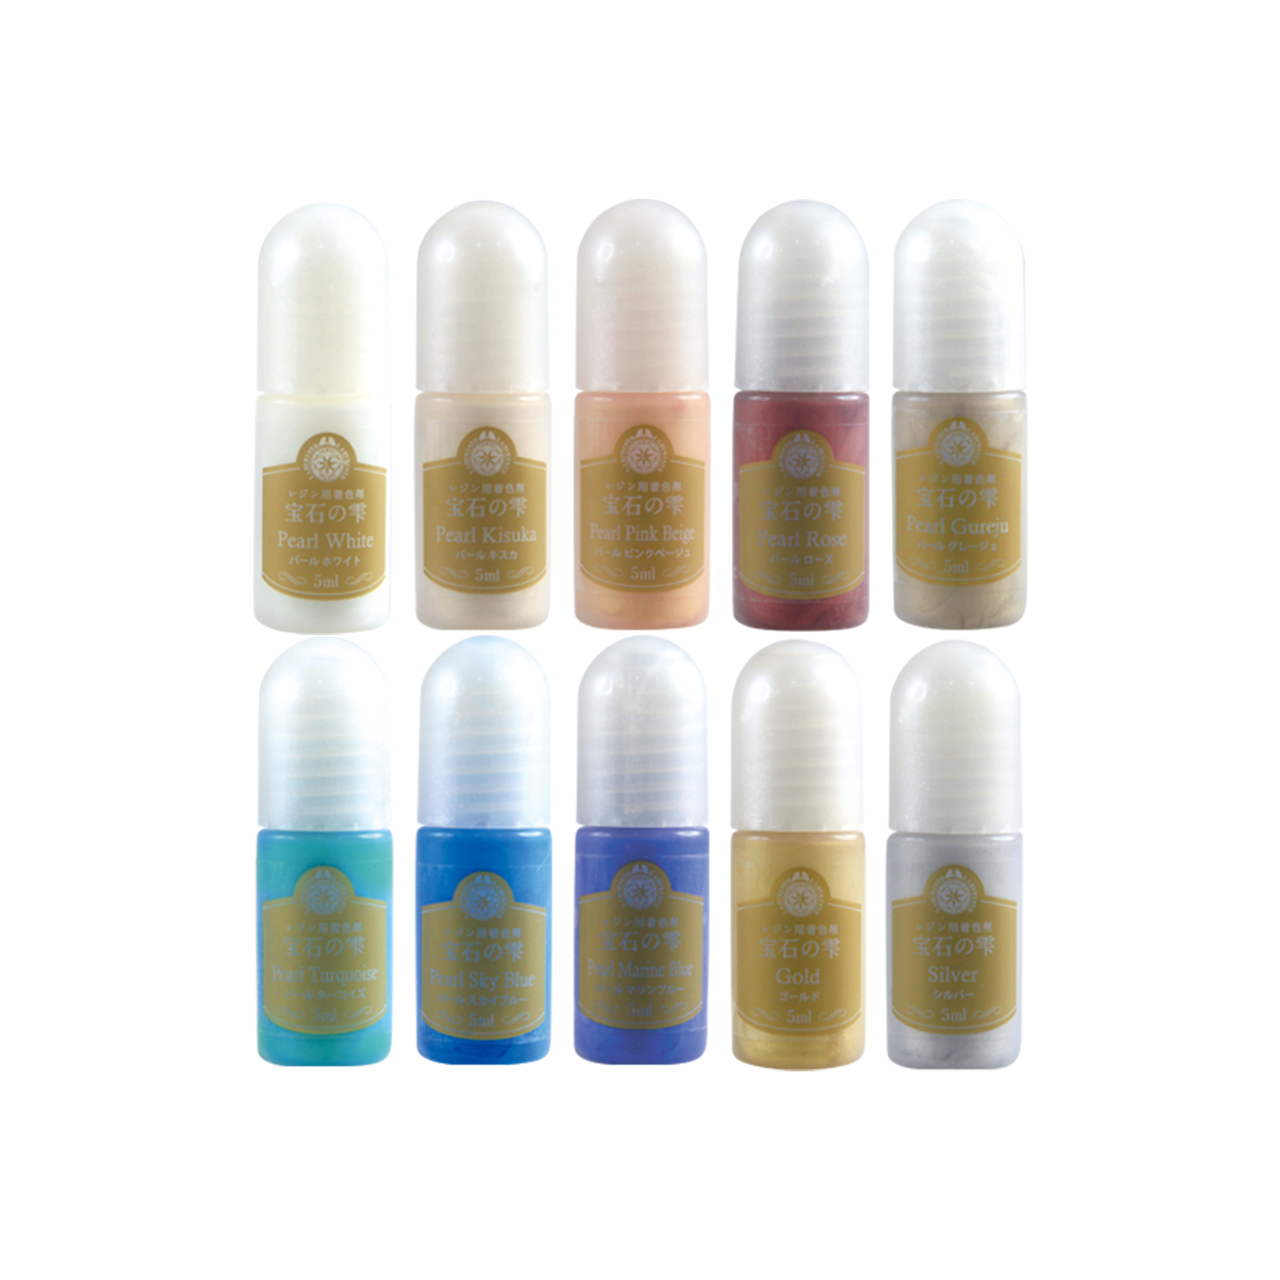 Padico Resin Pigments - Available now at Sweet Pea Dolls!